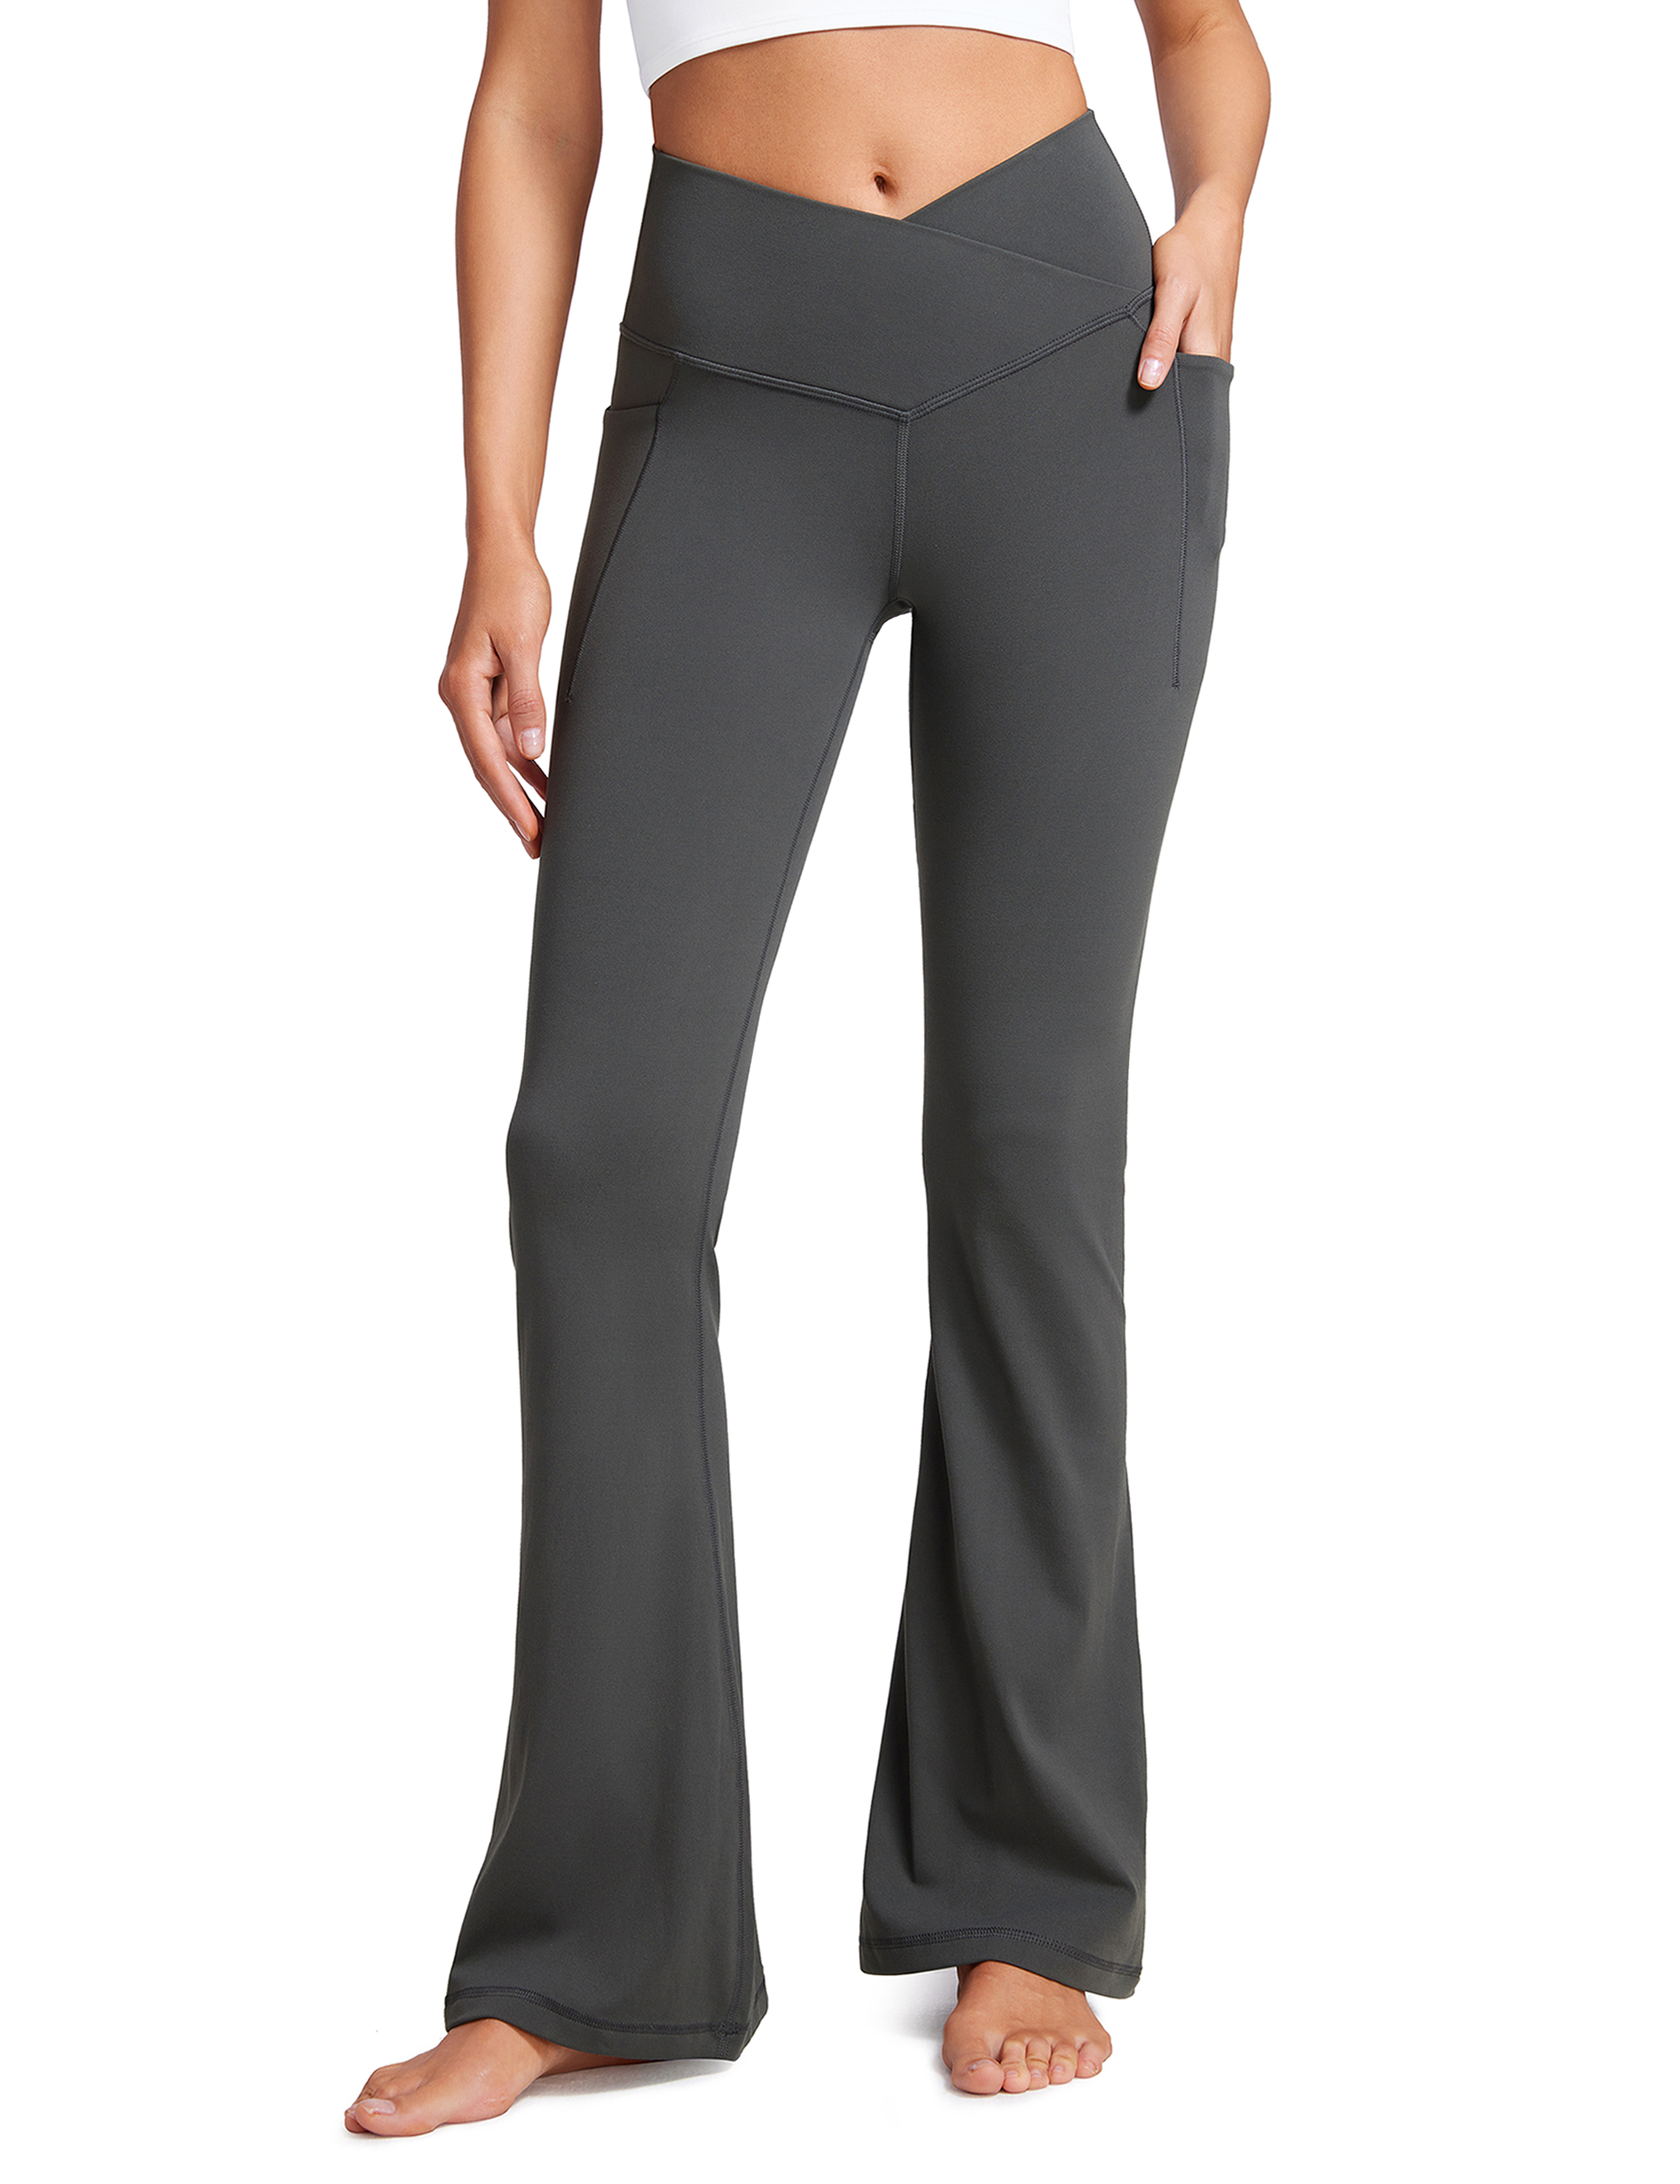 CRZ YOGA Women's Yoga Flare Leggings - 30 inches - High Waisted Bell  Bottoms Workout Pants